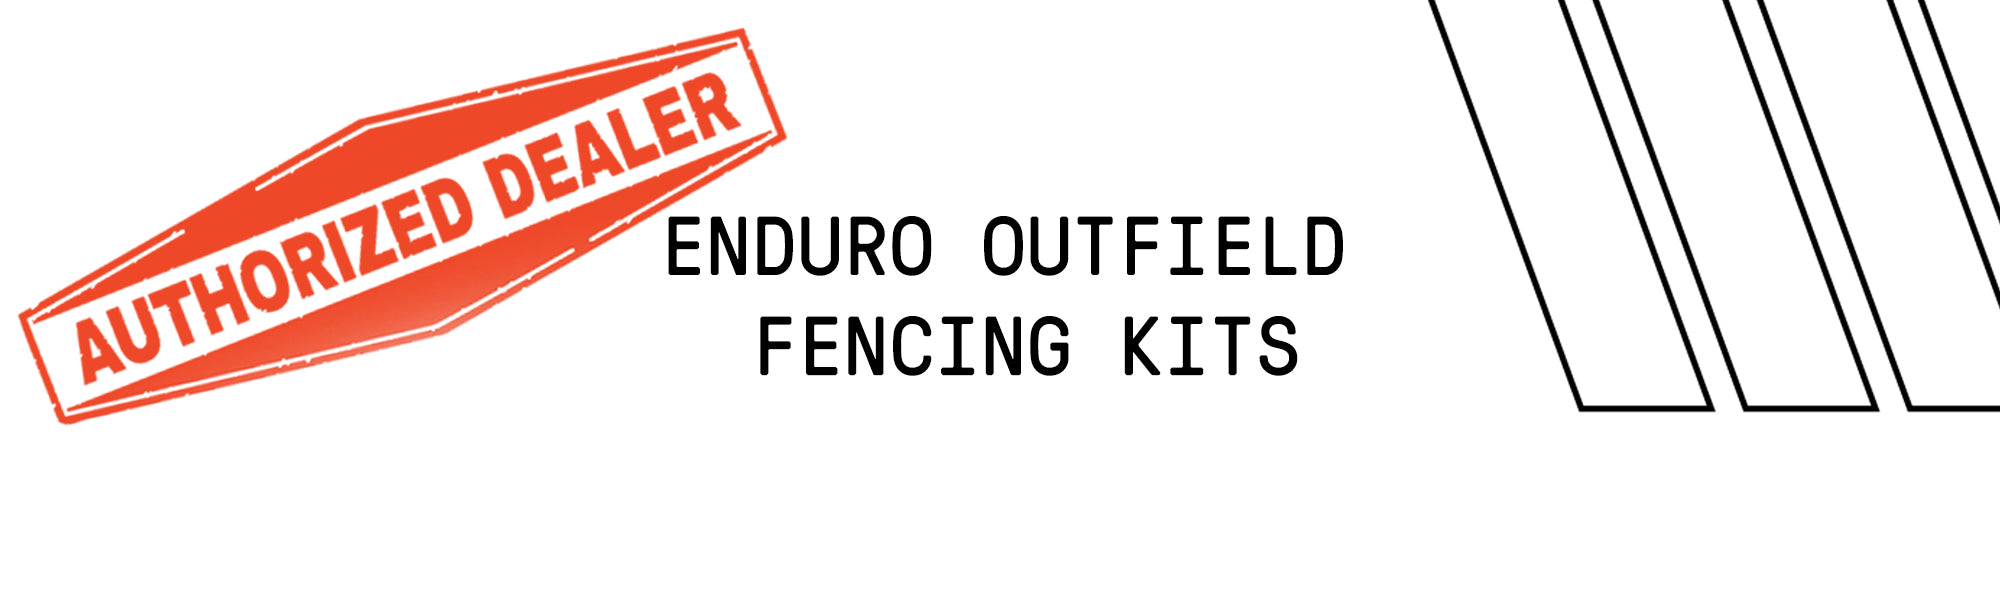 Enduro Outfield Fencing Kits